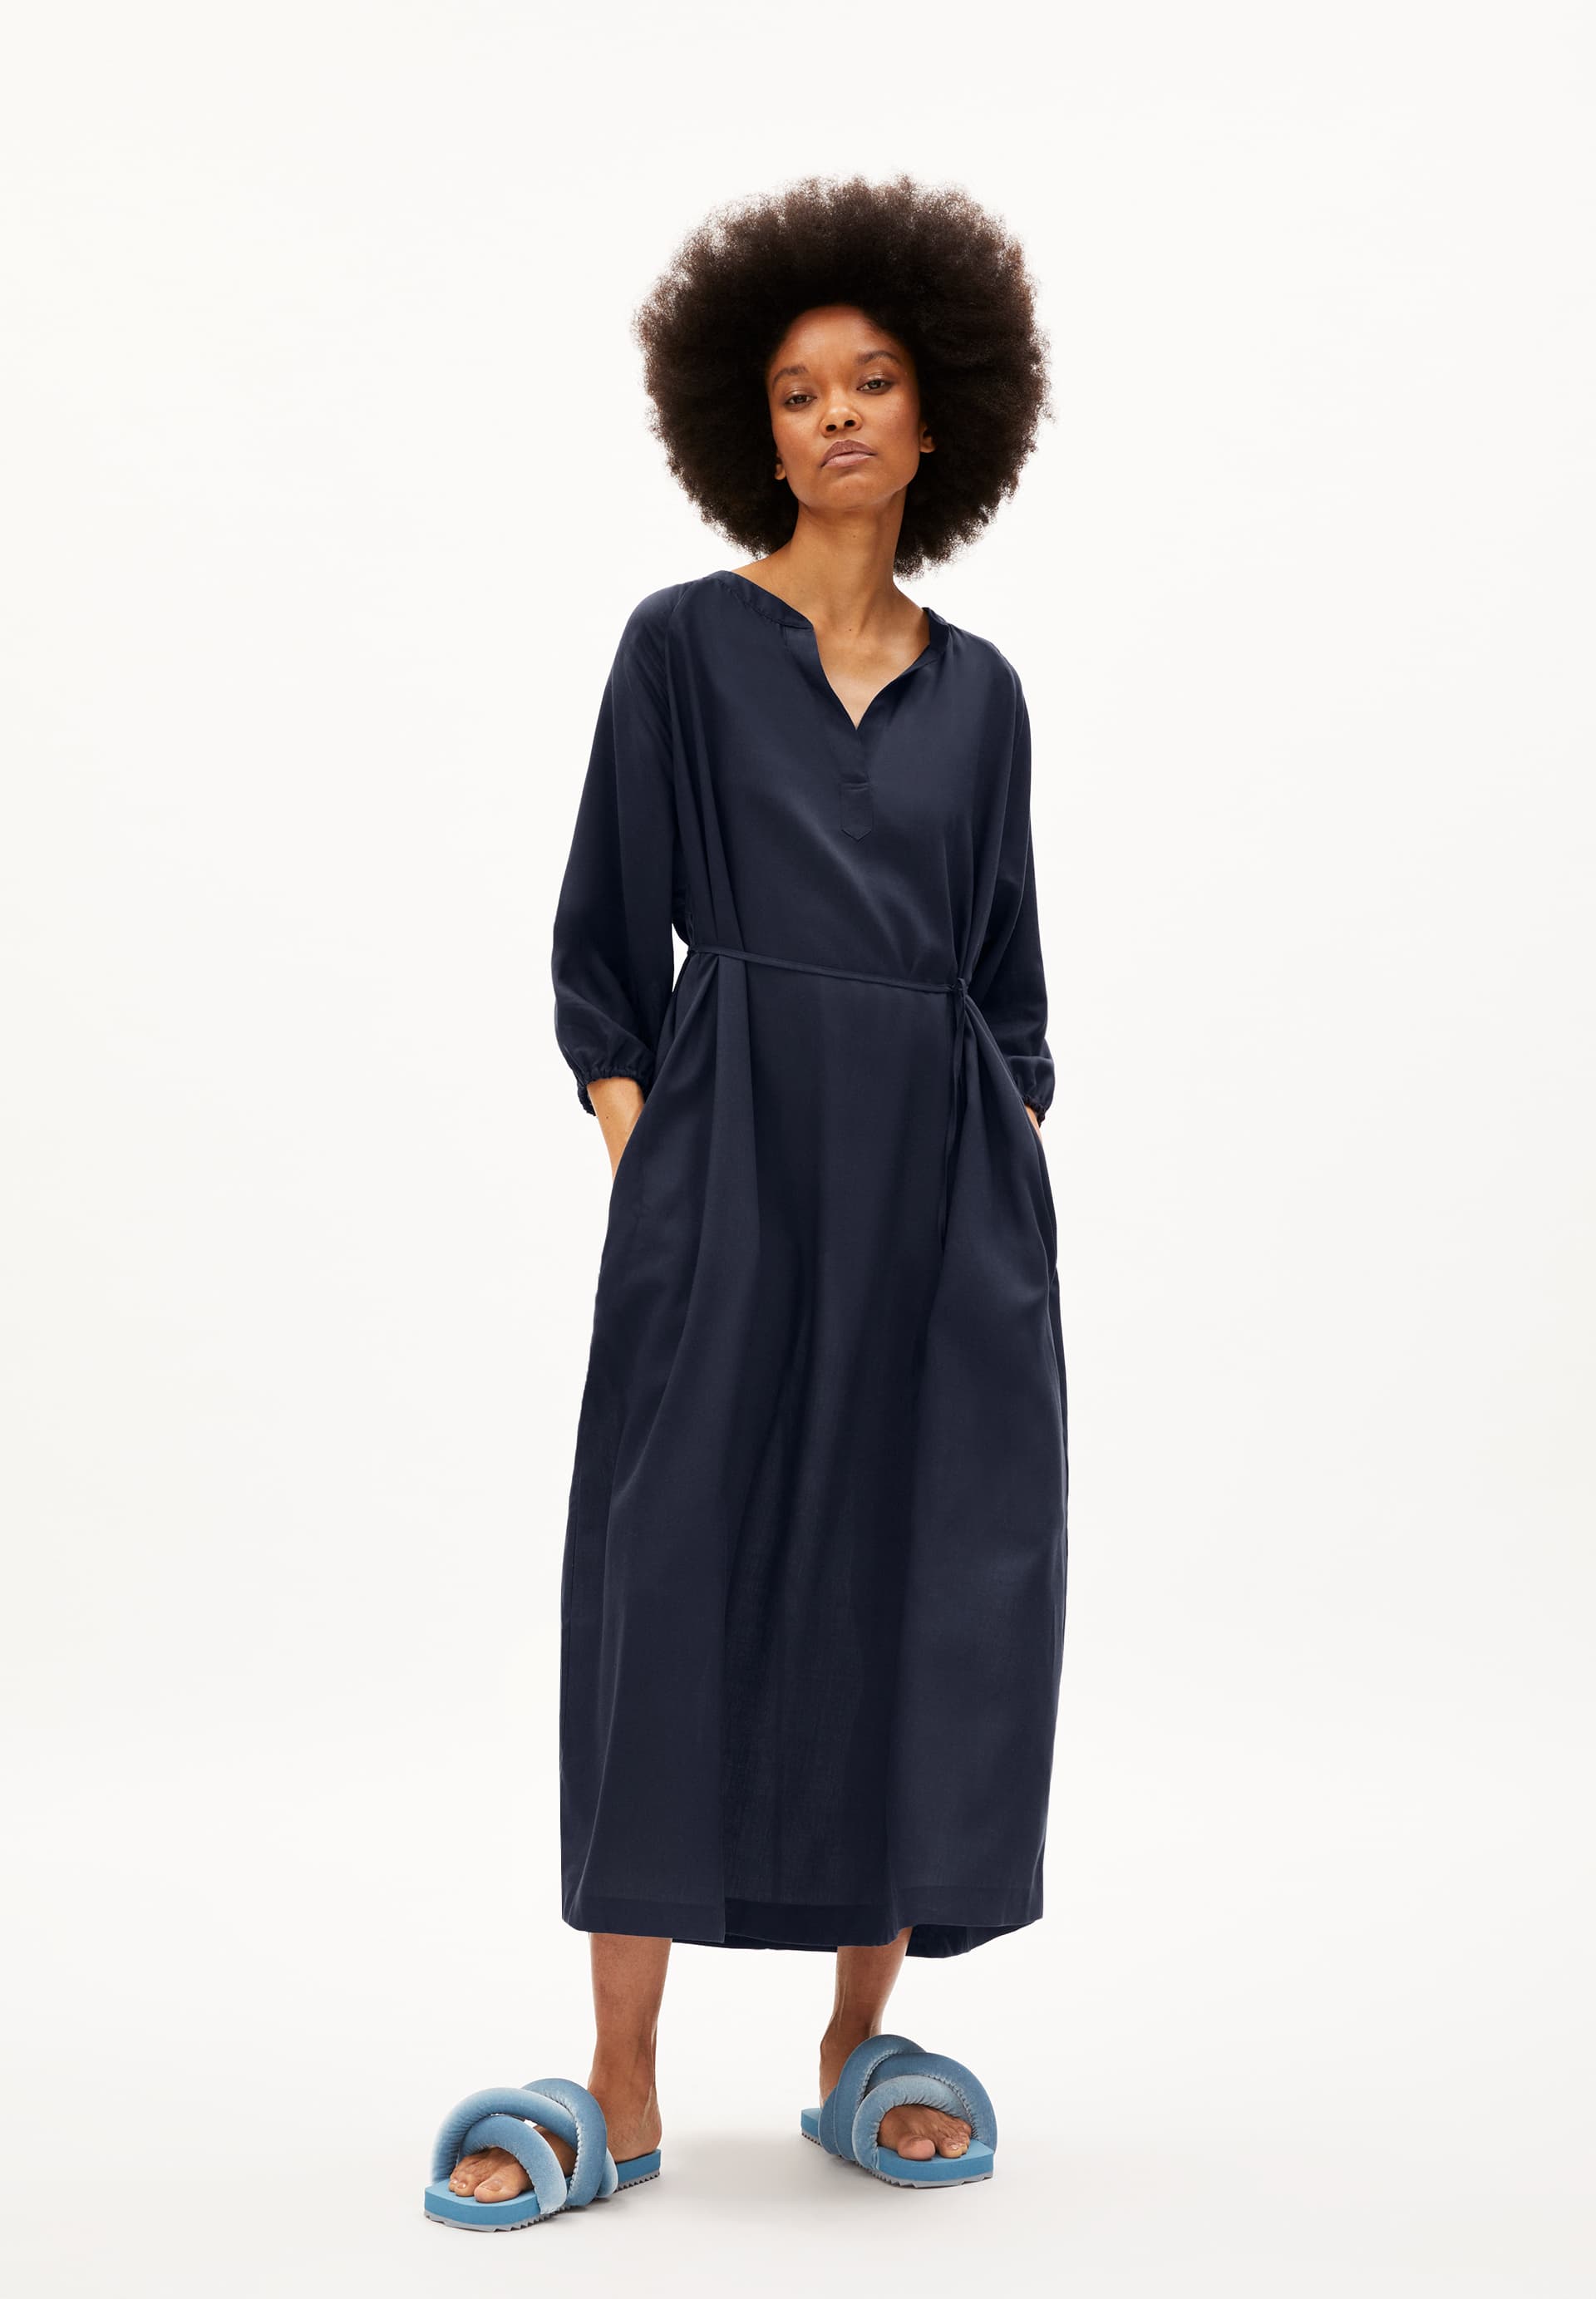 MADITHAA Woven Dress Oversized Fit made of TENCEL™ Lyocell